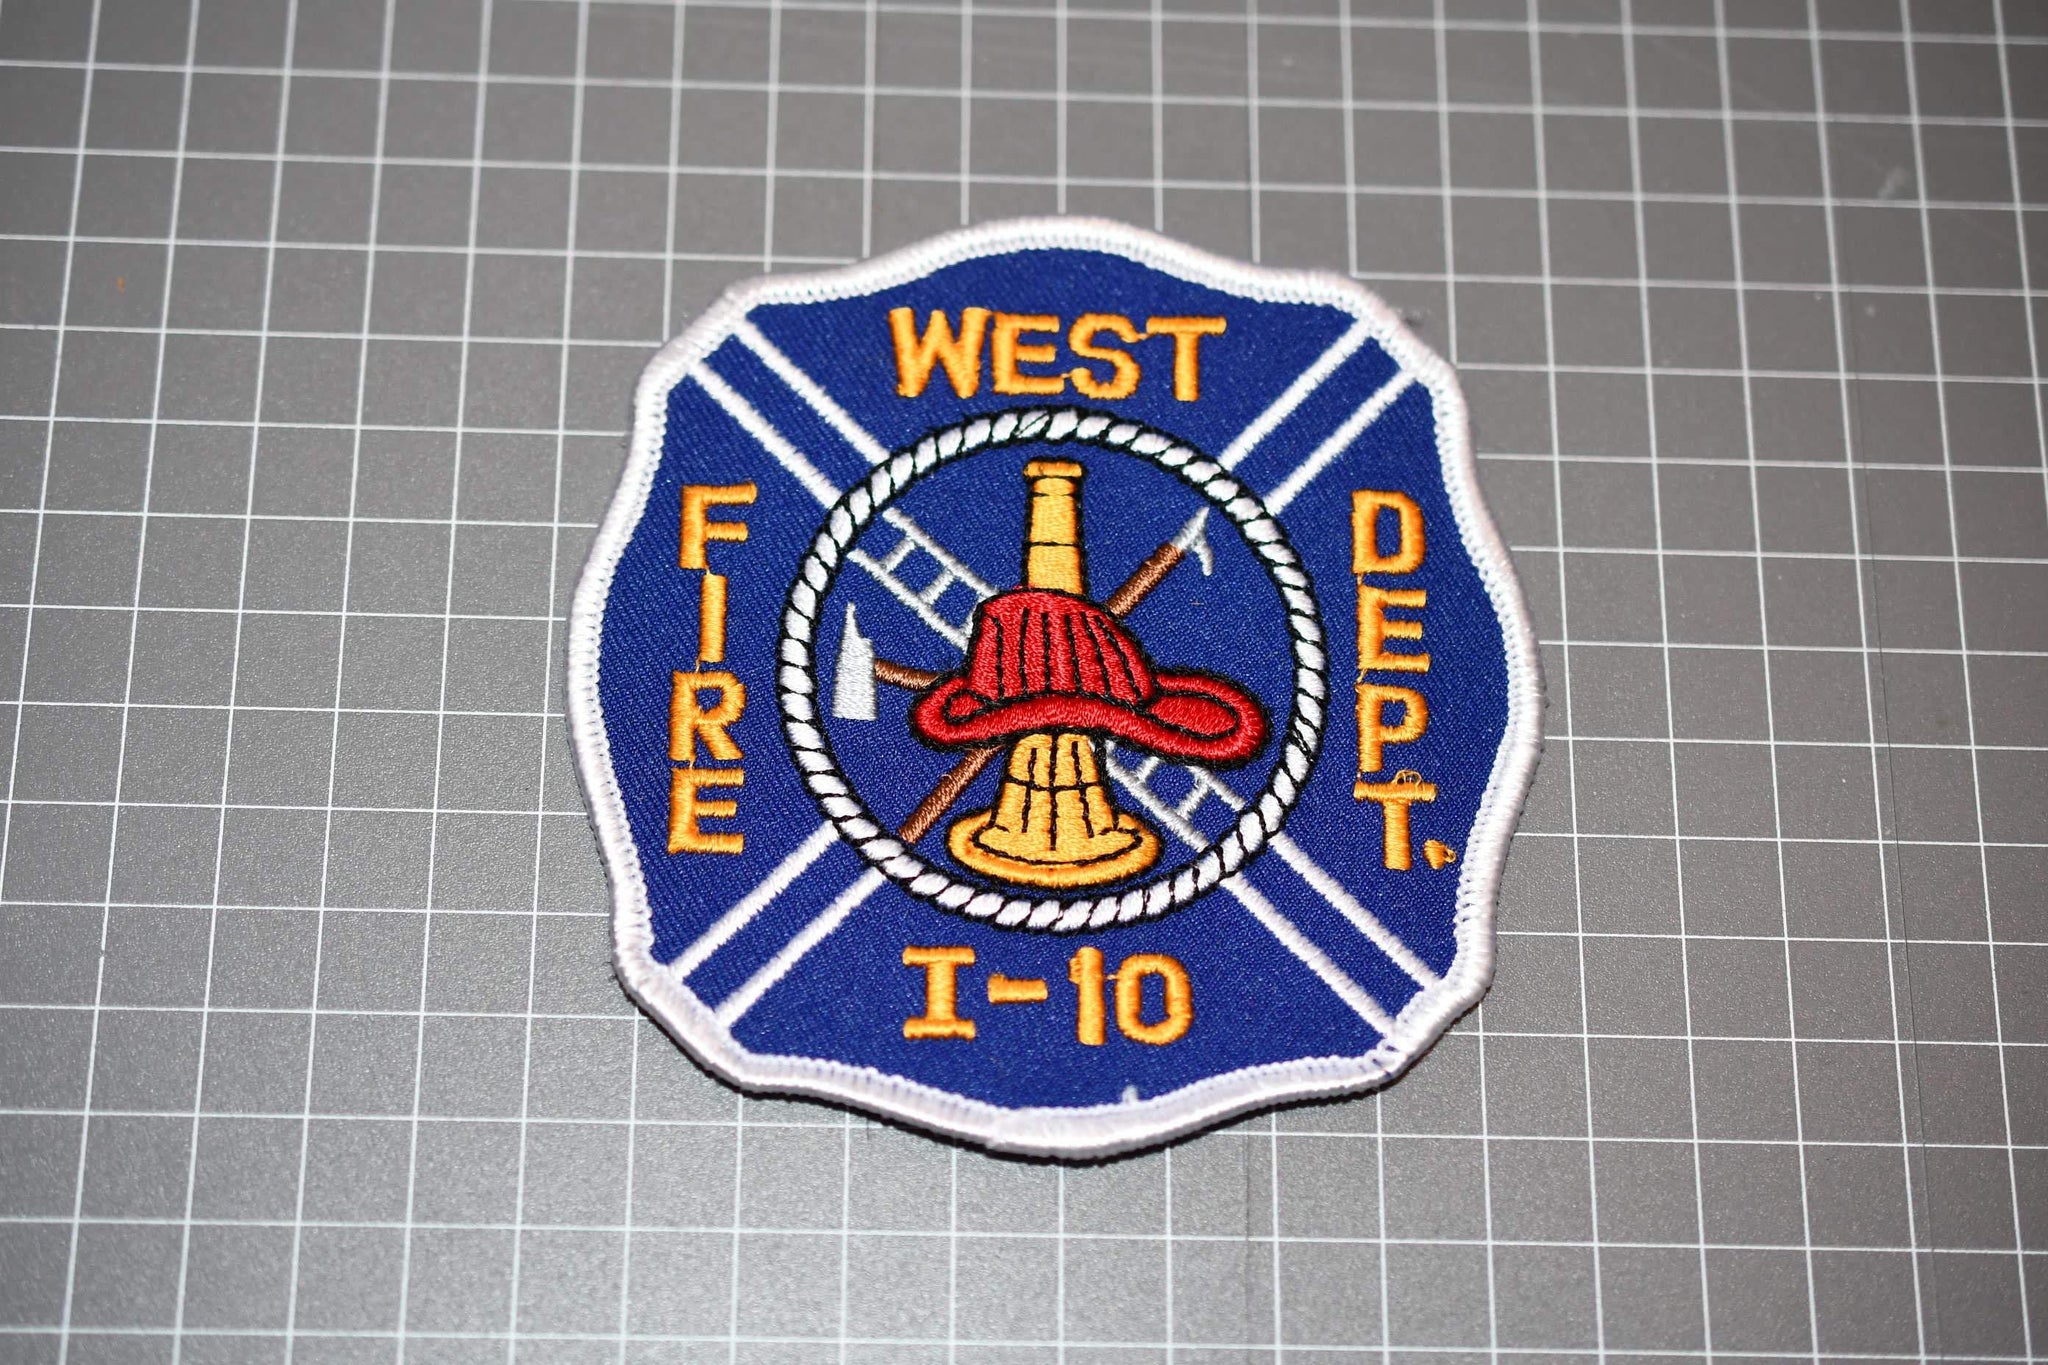 West I-10 Fire Department Patch (U.S. Fire Patches)